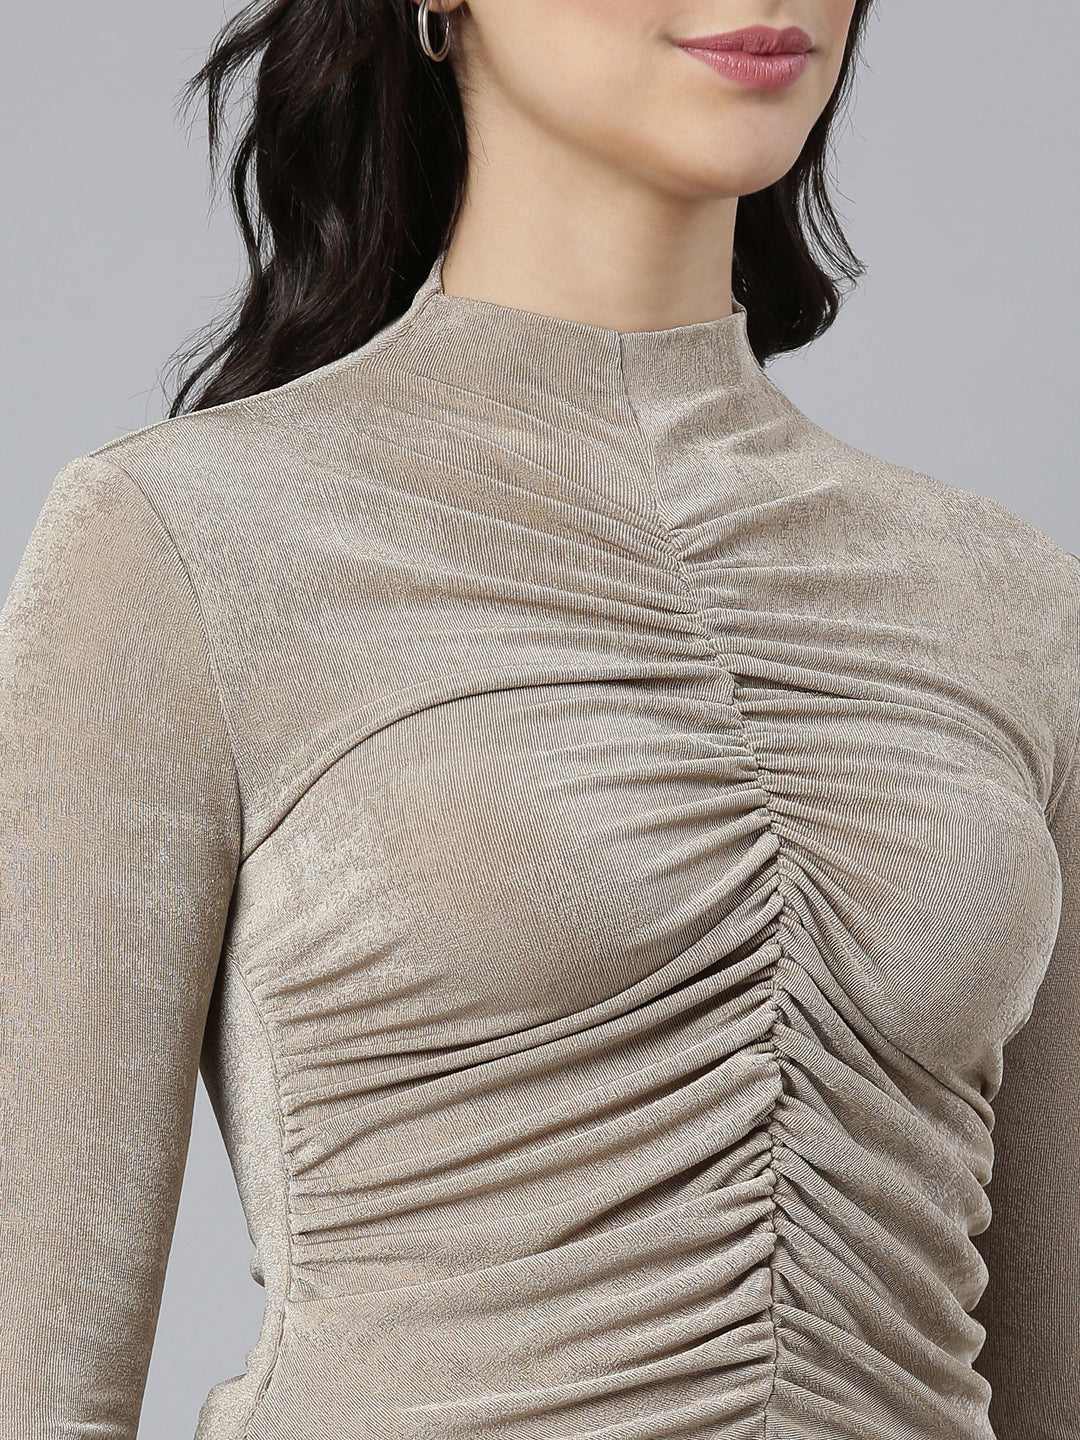 Women Solid Beige Fitted Semi Sheer Ruched Top